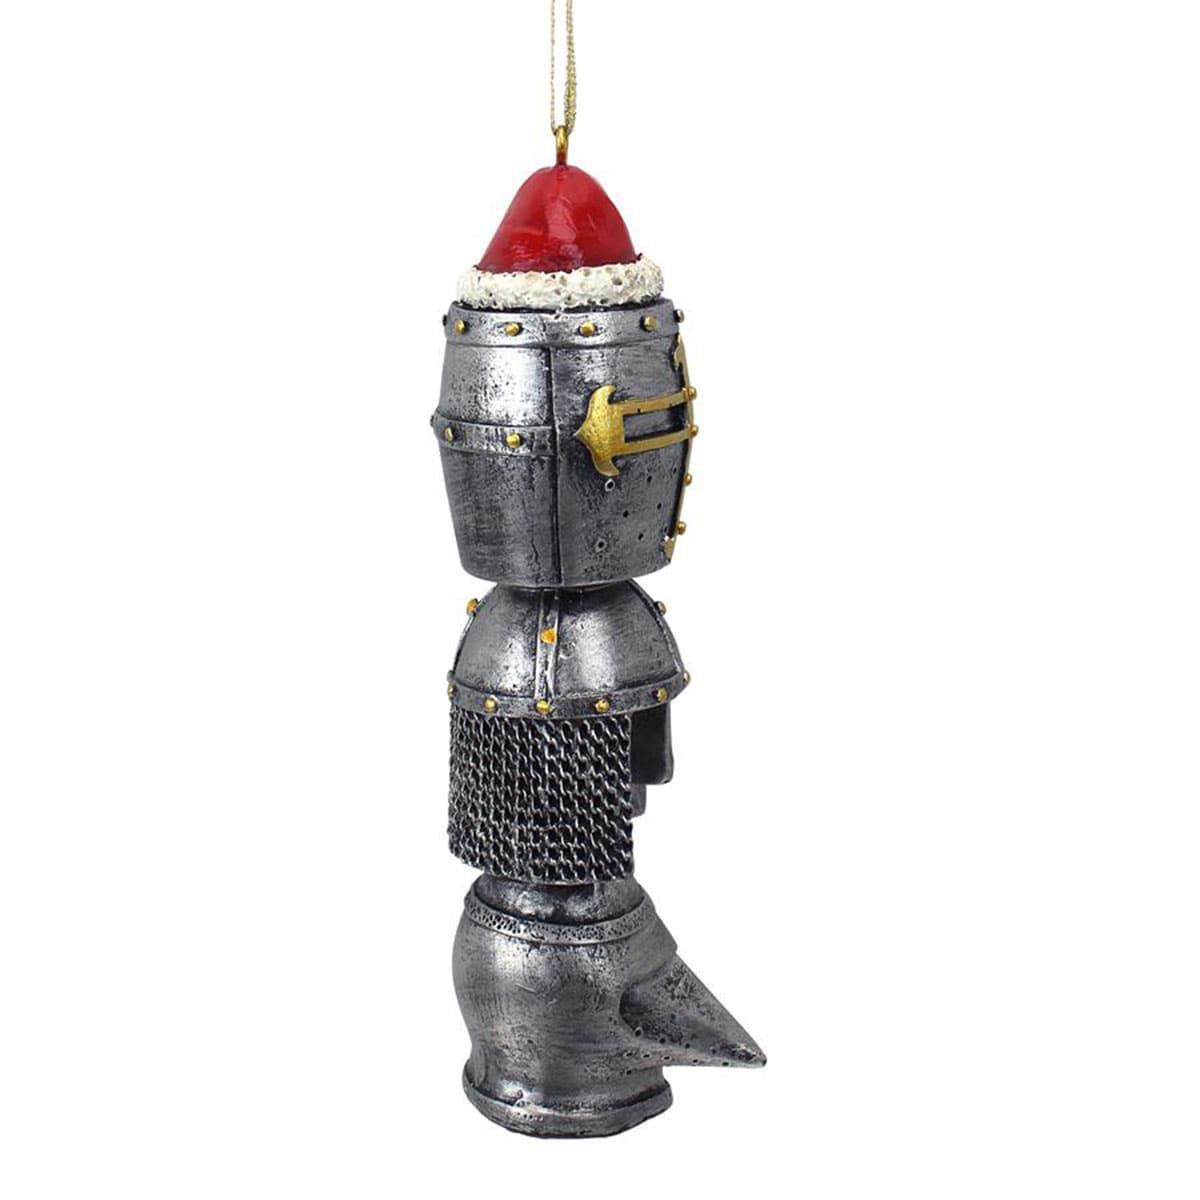 Medieval Helmet Totem Resin Holiday Ornament with Santa hat, Great Helm, Norman Helm and Pigface Bascinet Helm